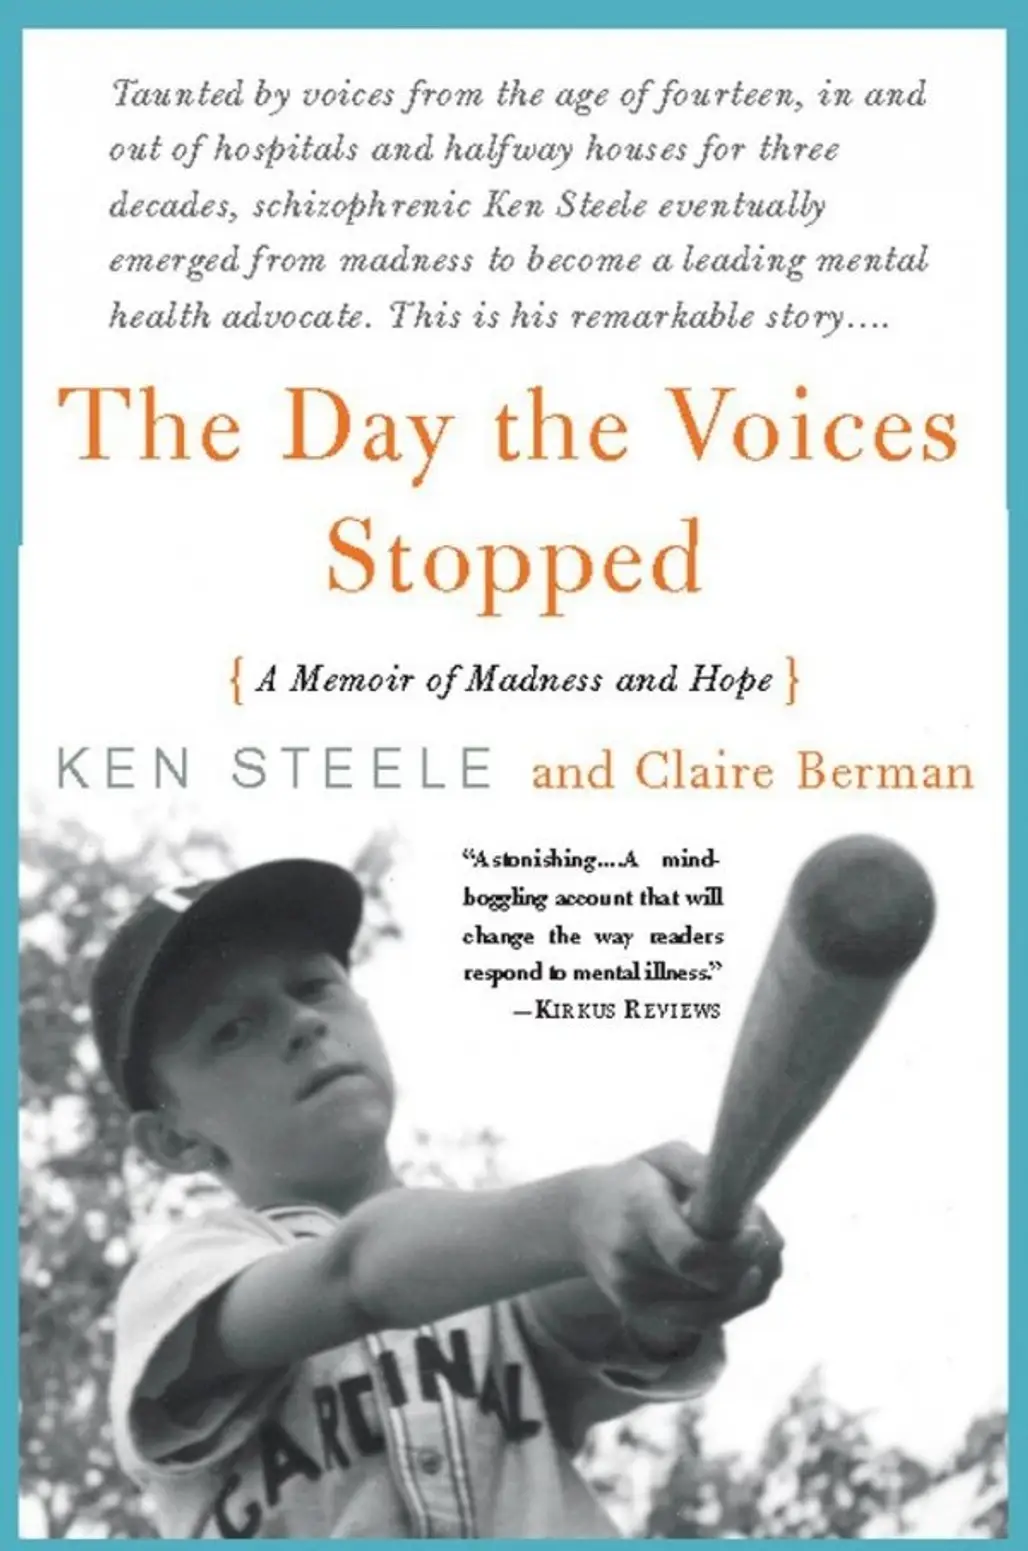 “the Day the Voices Stopped”